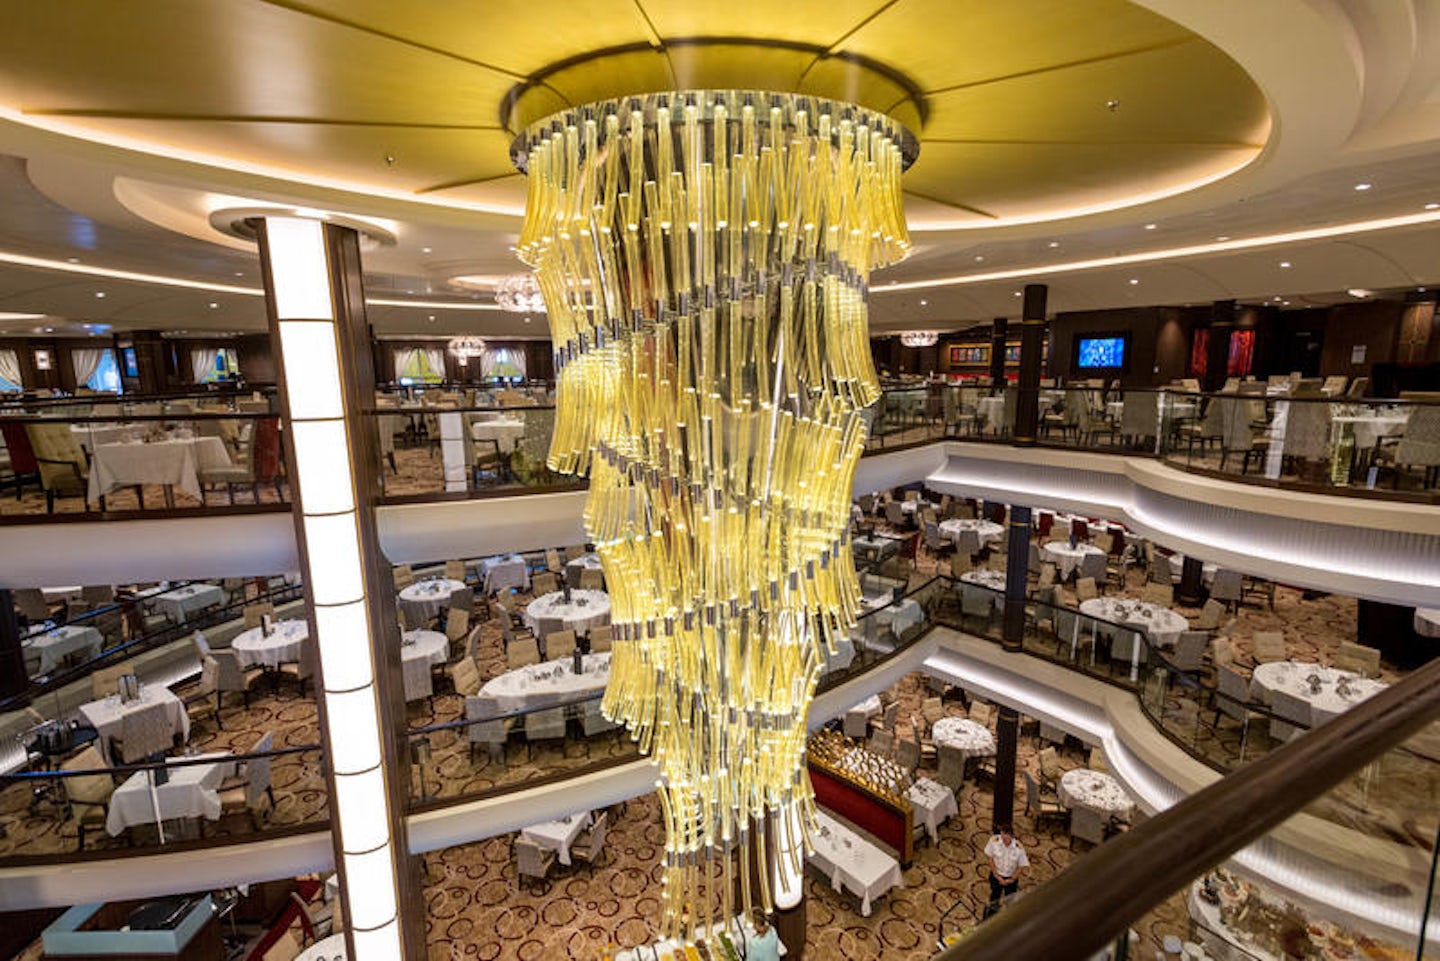 Symphony Of The Seas Dining Room